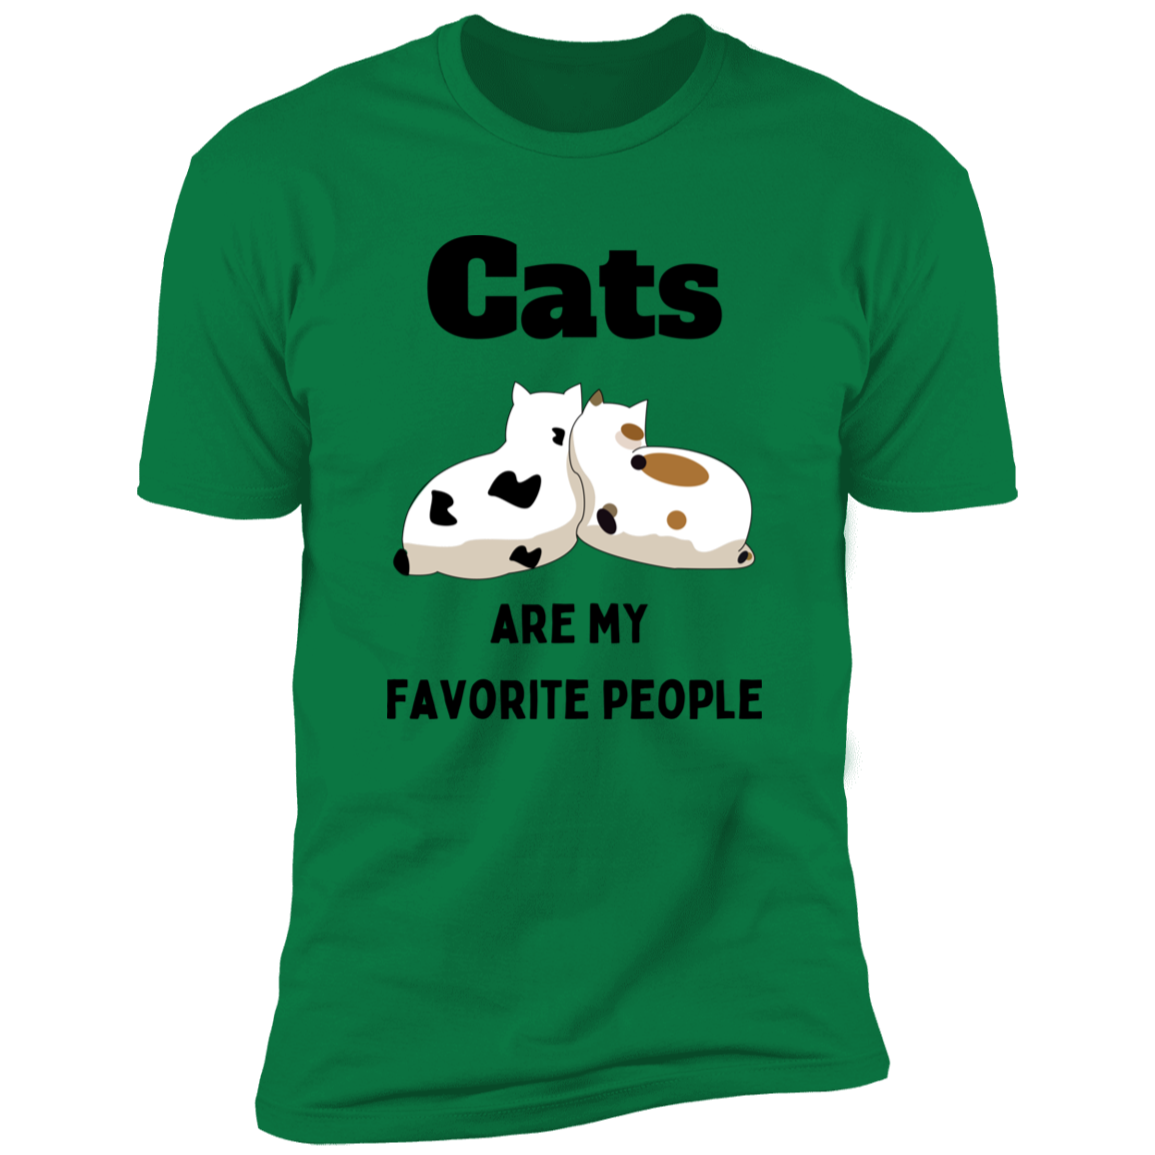 Cats Are My Favorite People T-shirt, Cat Shirt for humans, in kelly green